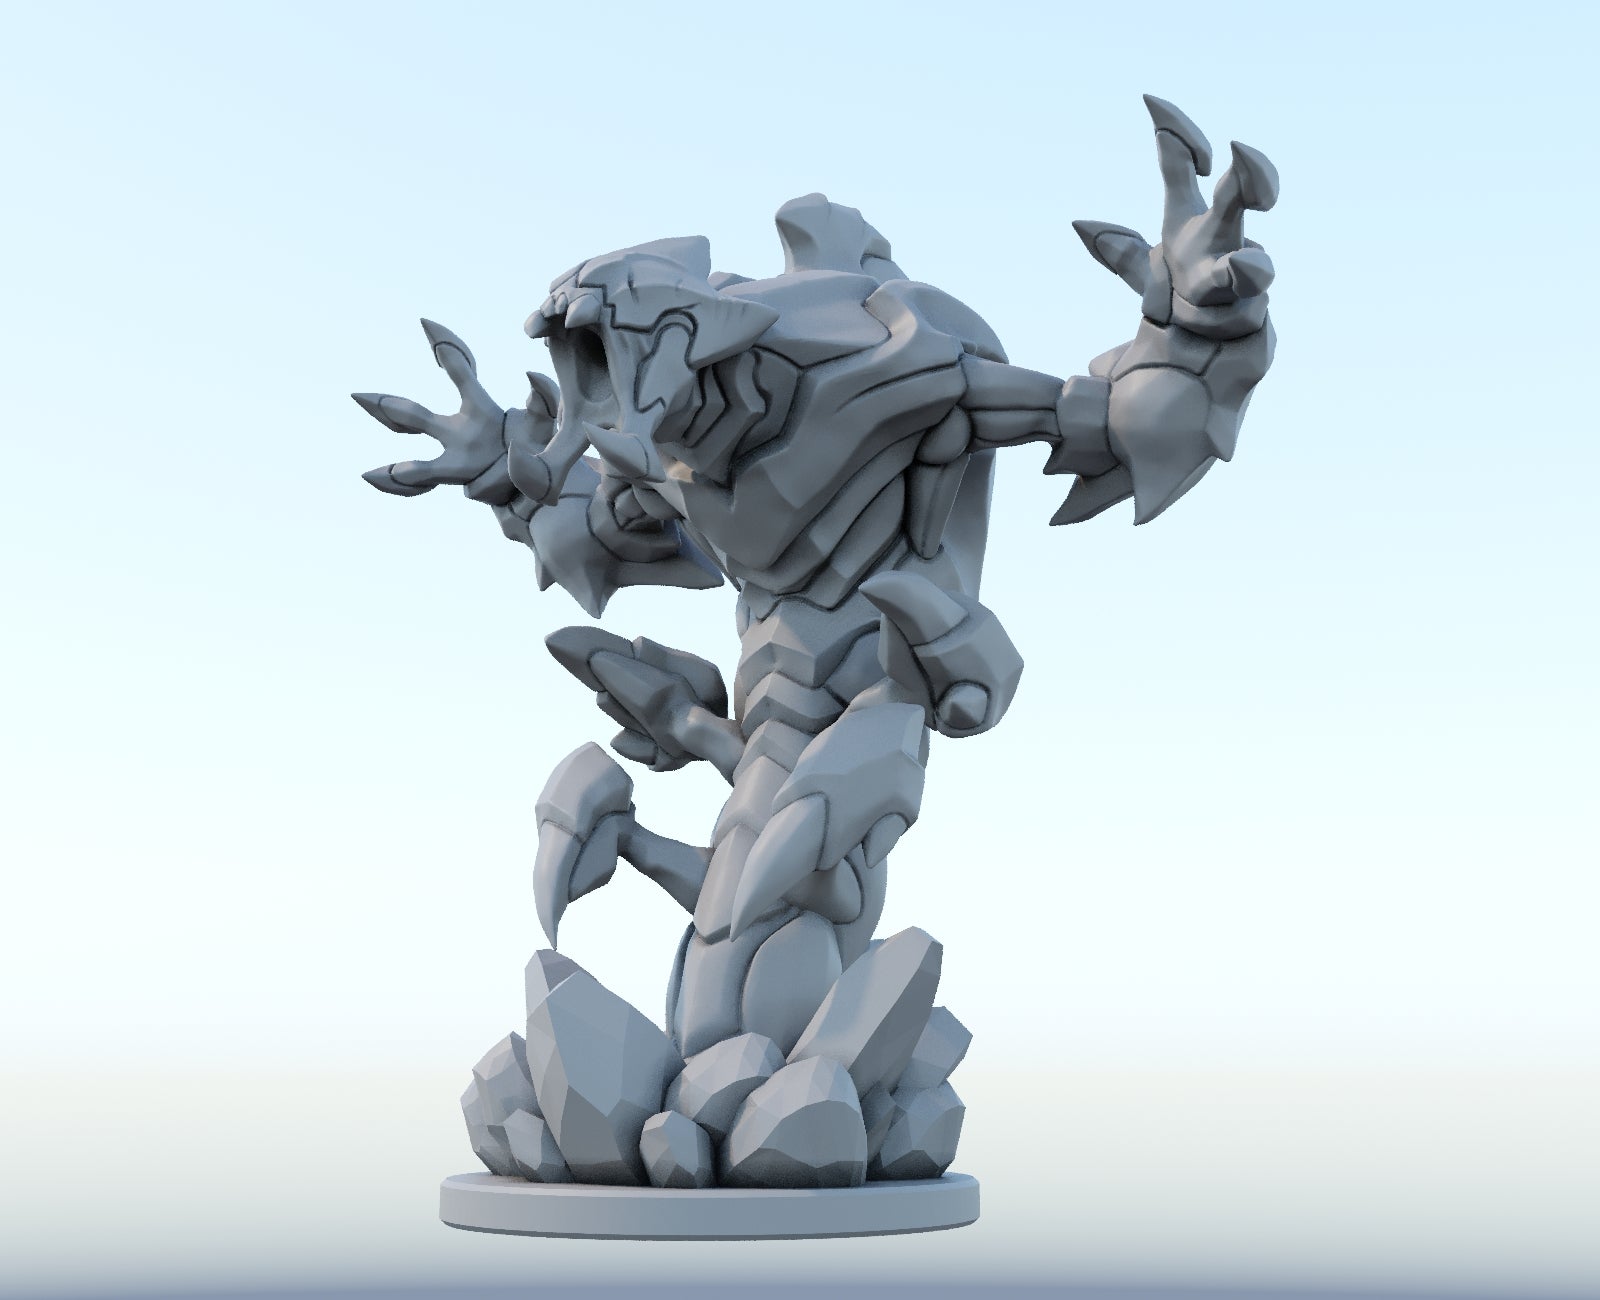 Reksai 3D-printed League of Legends champion figure. Decorate your gaming setup or home with your favorite League of Legends champion! Choose between the unpainted version, perfect for you to paint yourself, or the hand-painted version by a professional painter. Order your figure today!